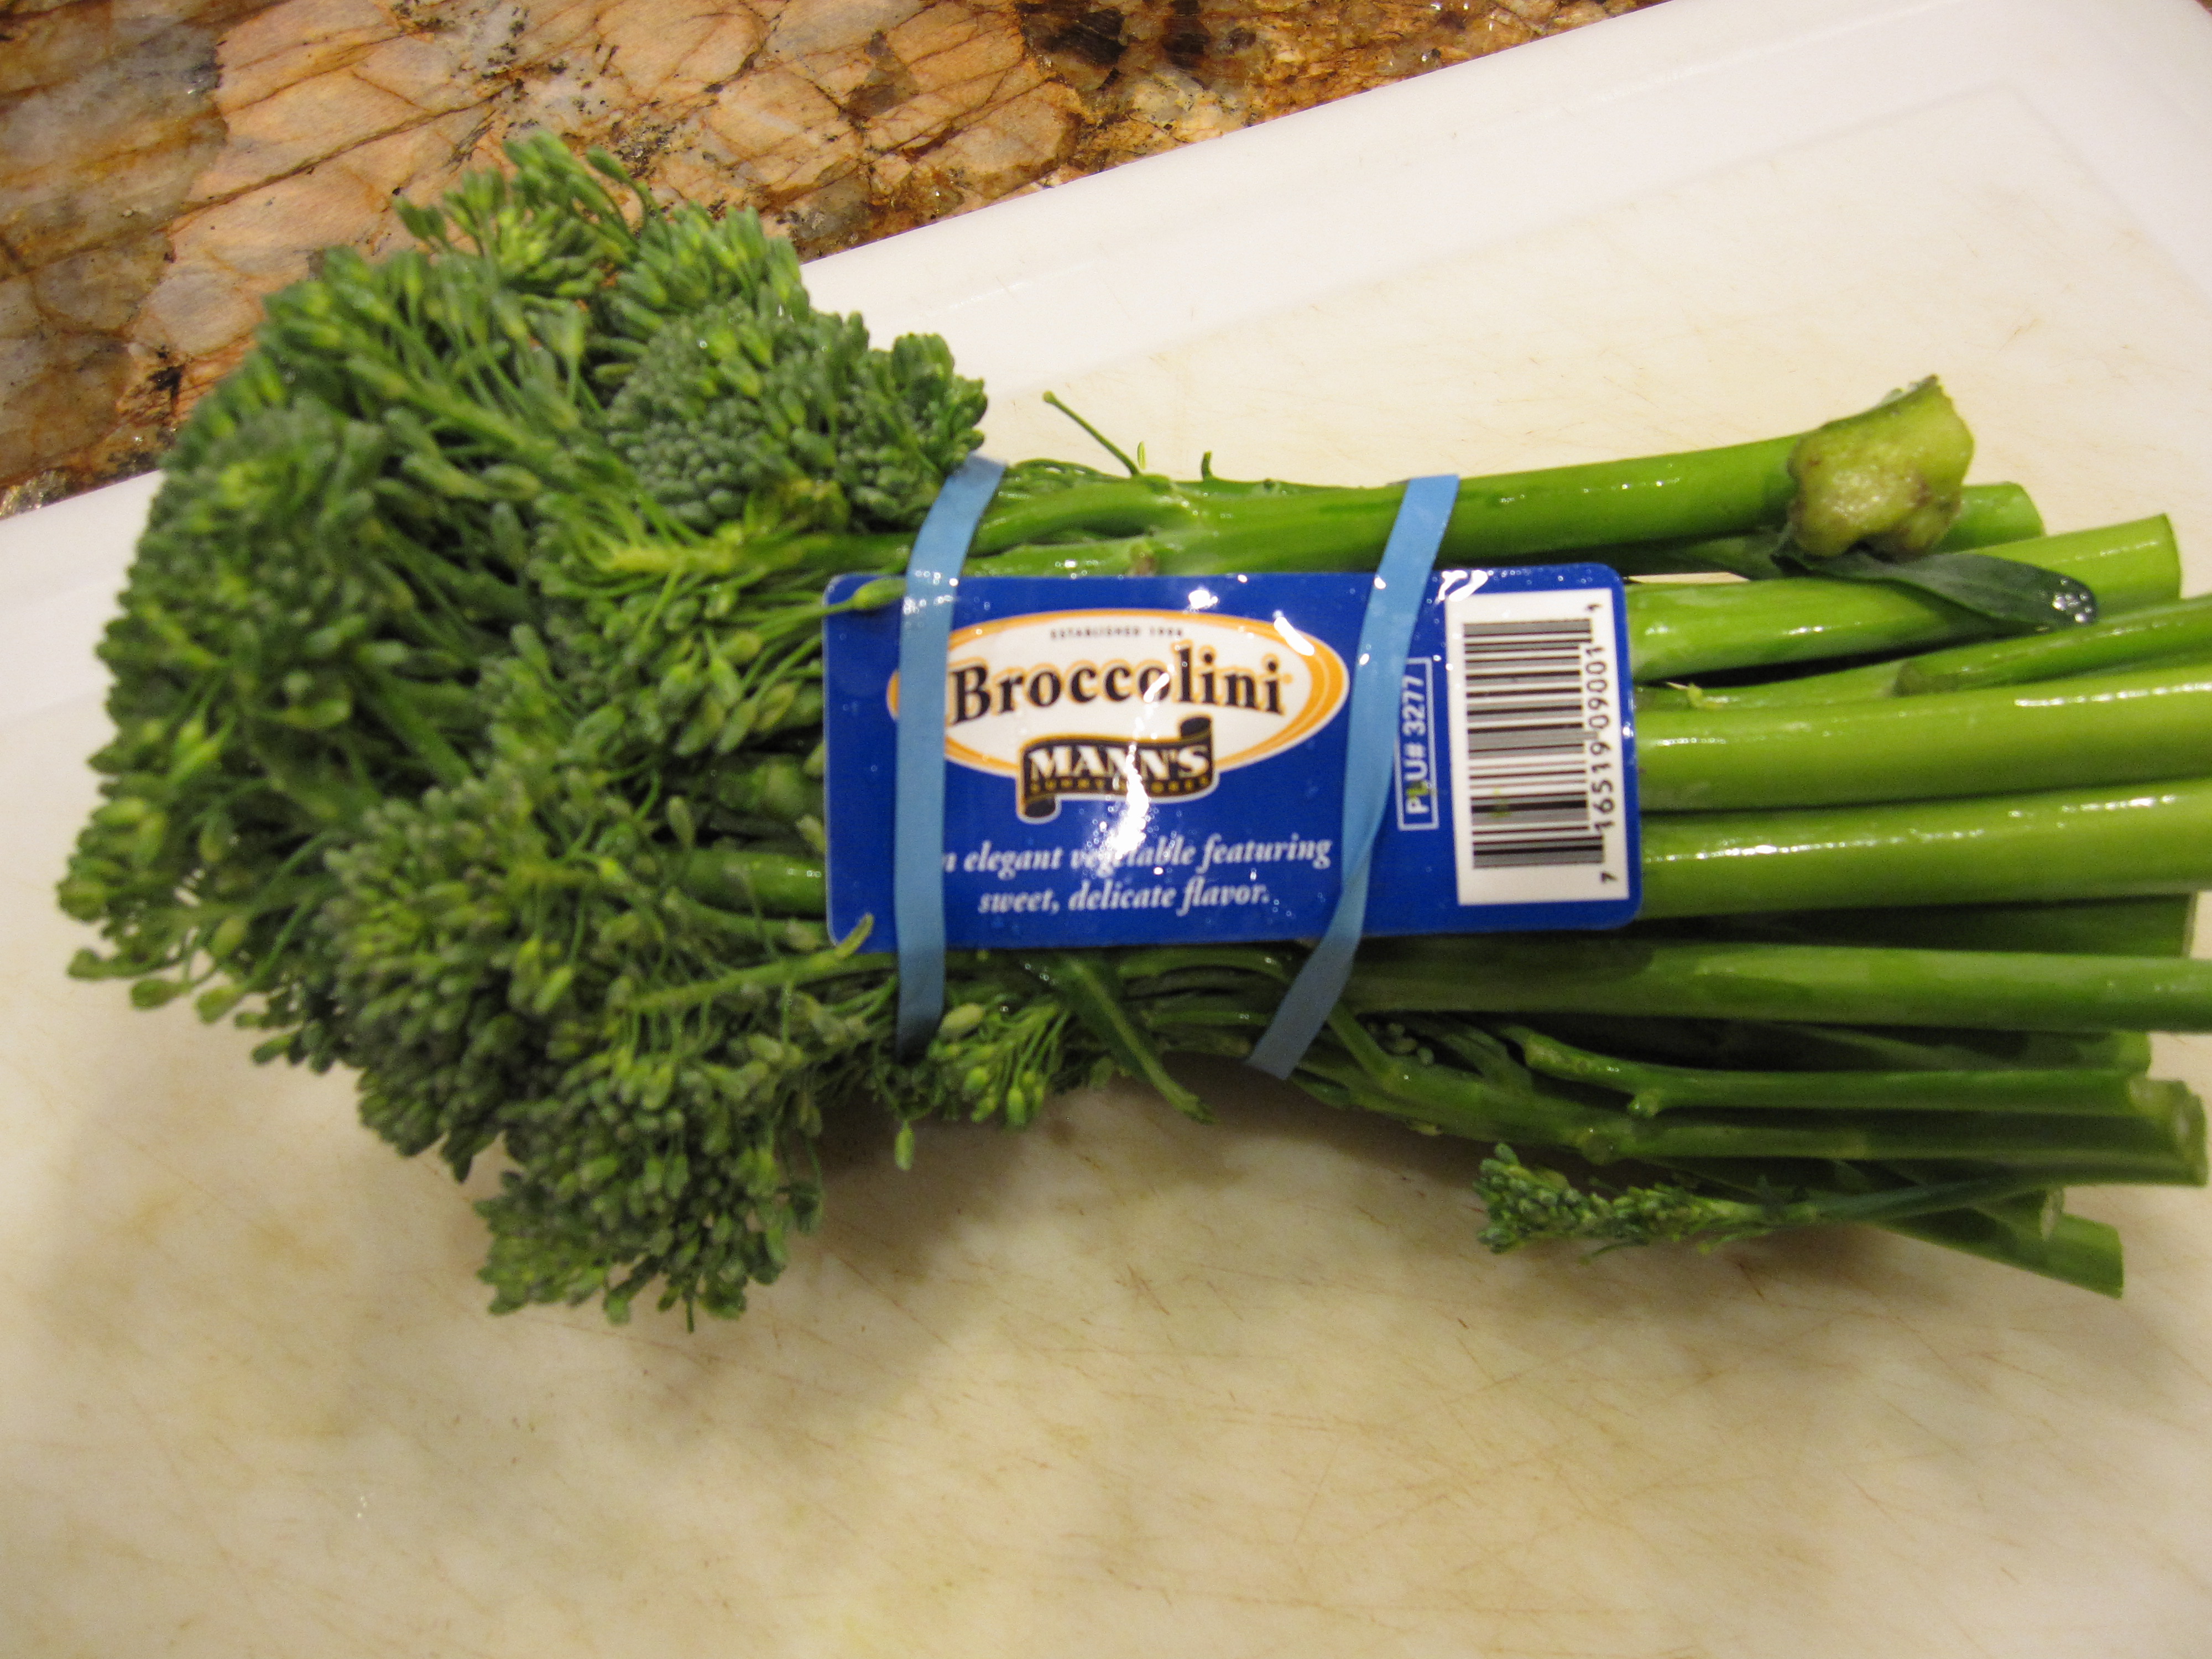 Fresh broccolini ready to be cooked.